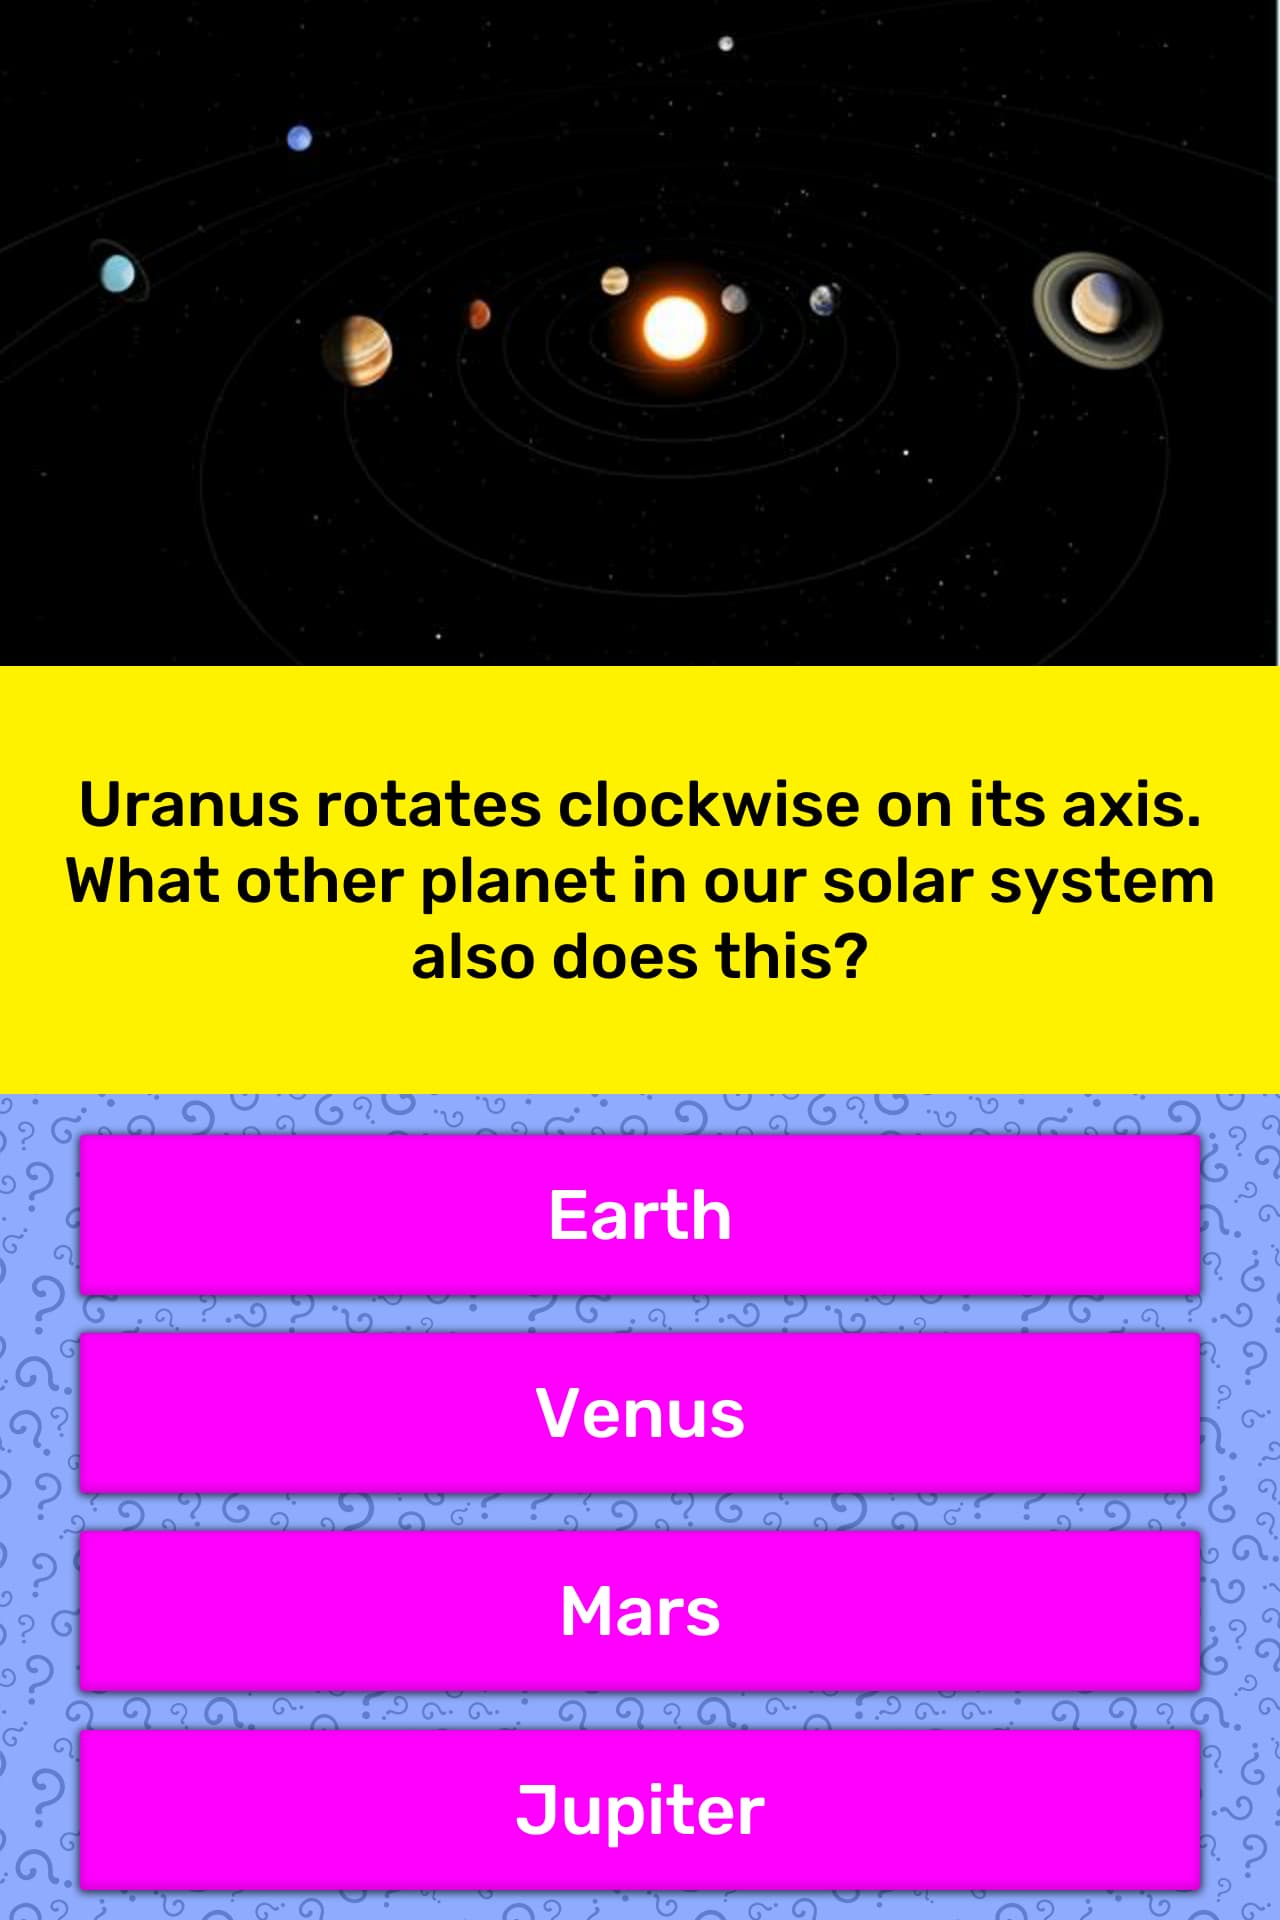 which planet spins clockwise